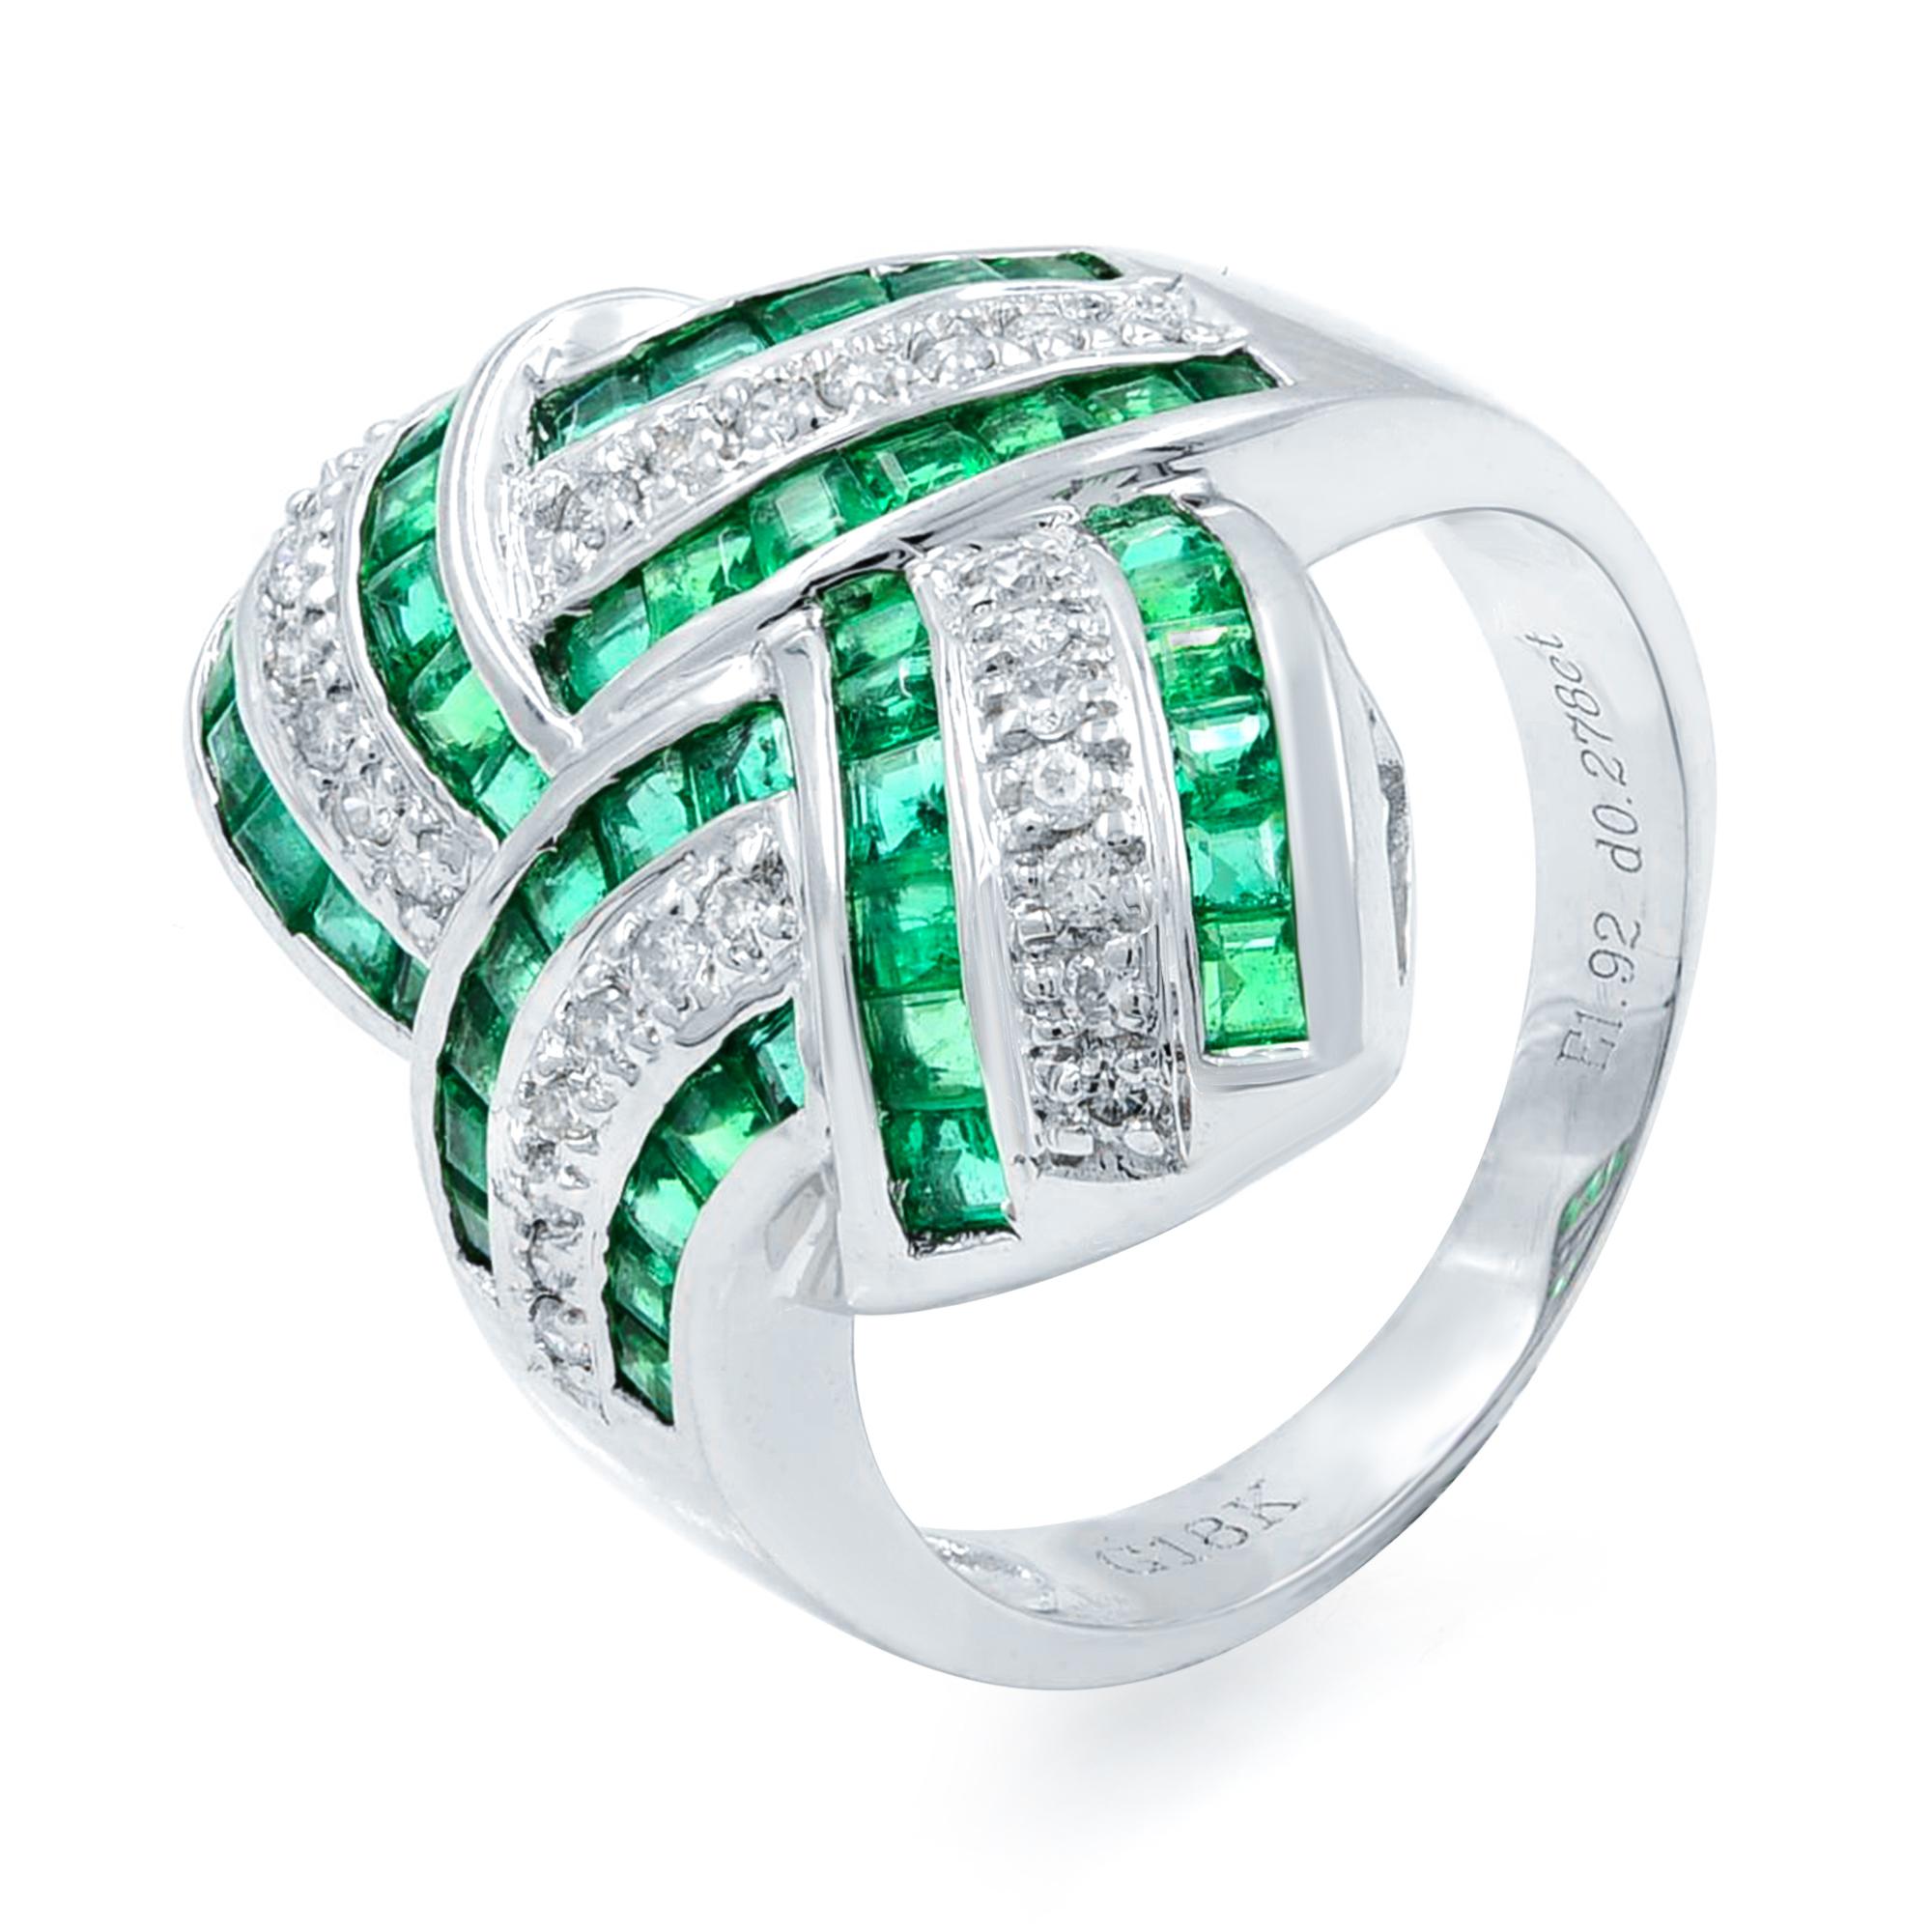 This sleekly styled modern band ring flashes around the top half with rows of bright, seamlessly-set square-cut emeralds bordered by seamlessly-set vibrant diamonds. A blazingly beautiful and impressive estate jewel, sturdily crafted in gleaming 18k